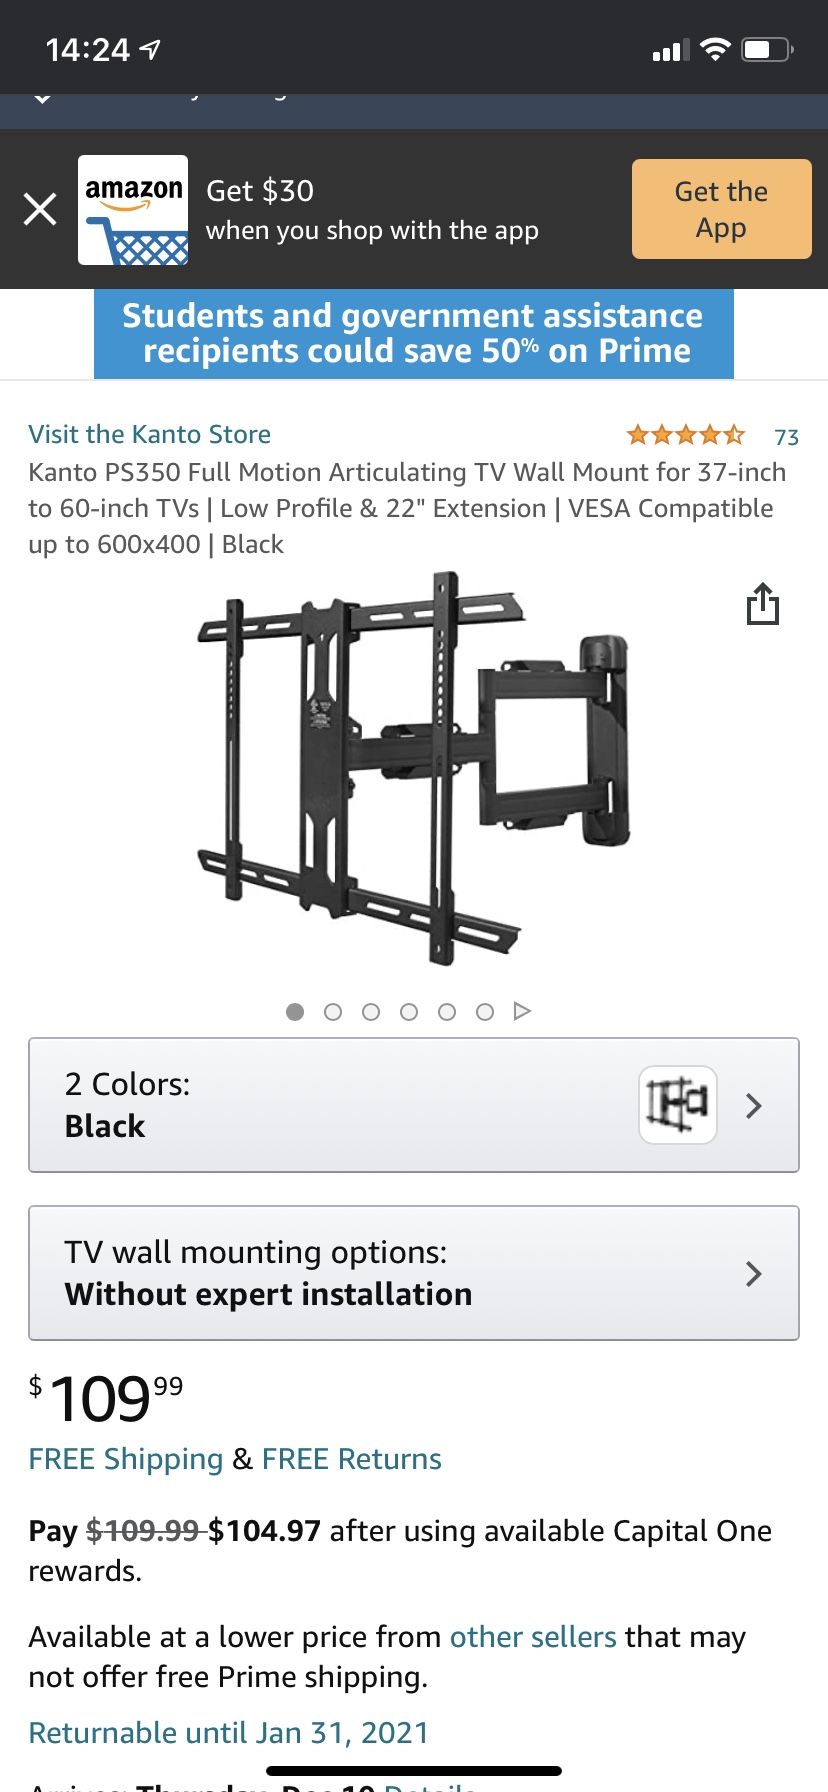 Kanto PS350 Full Motion Articulating TV Wall Mount for 37-inch to 60-inch TVs